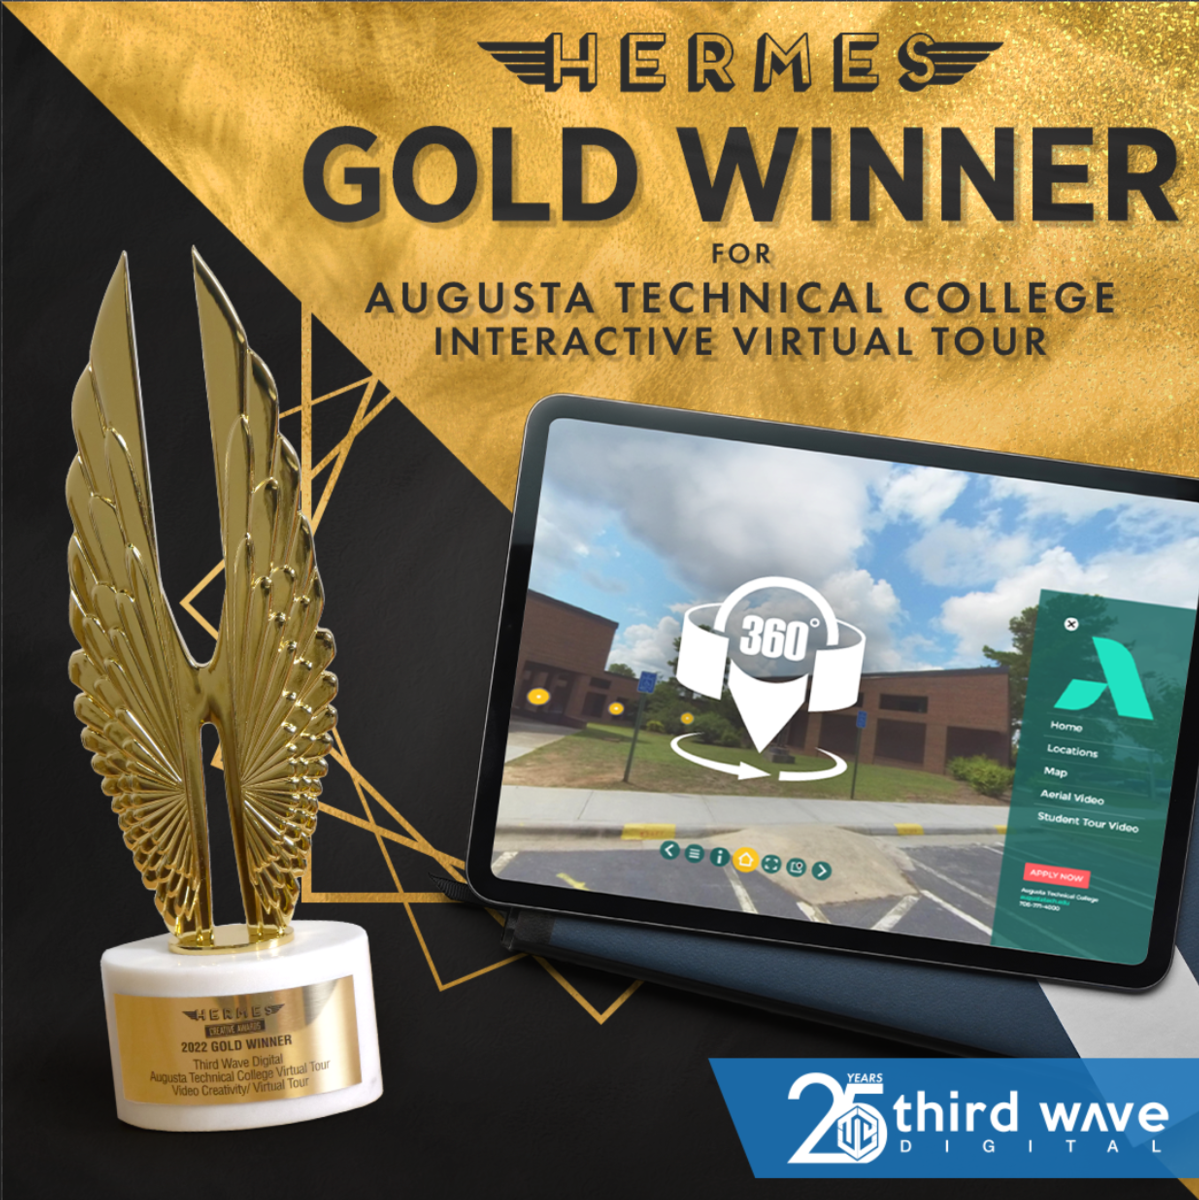 Third Wave Digital won gold for Augusta Technical College interactive virtual tour